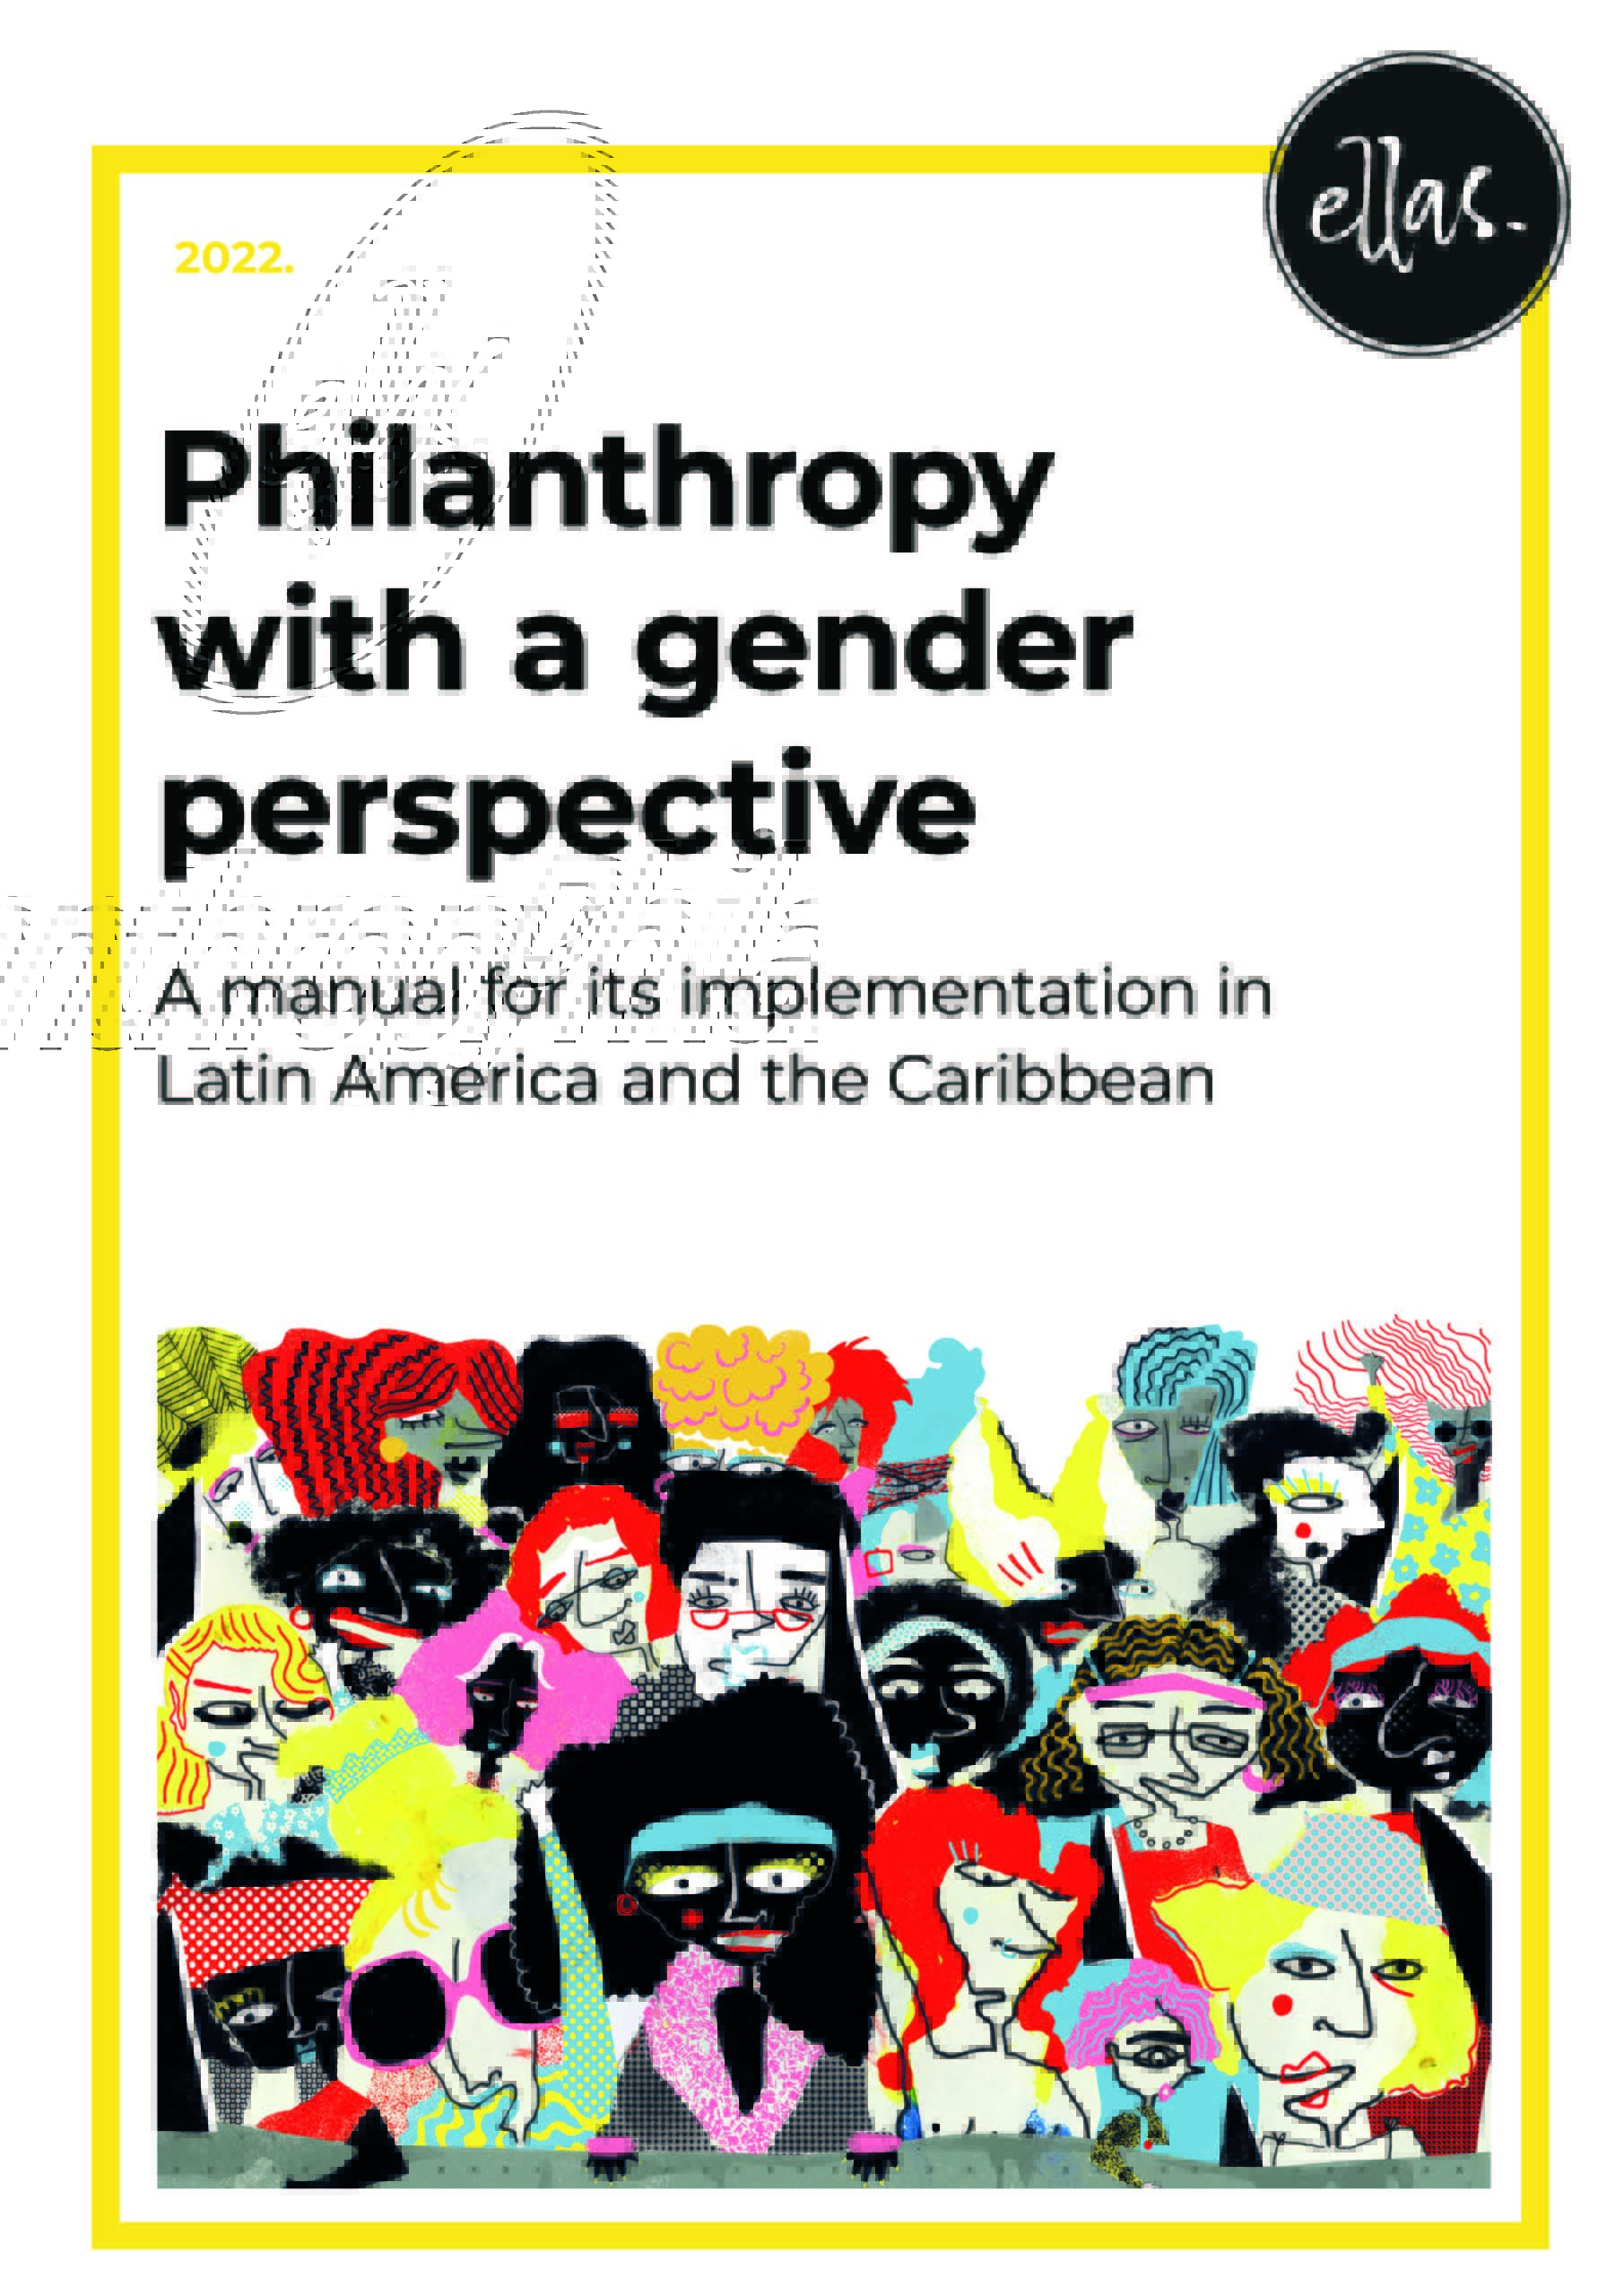 Philanthropy with a gender perspective